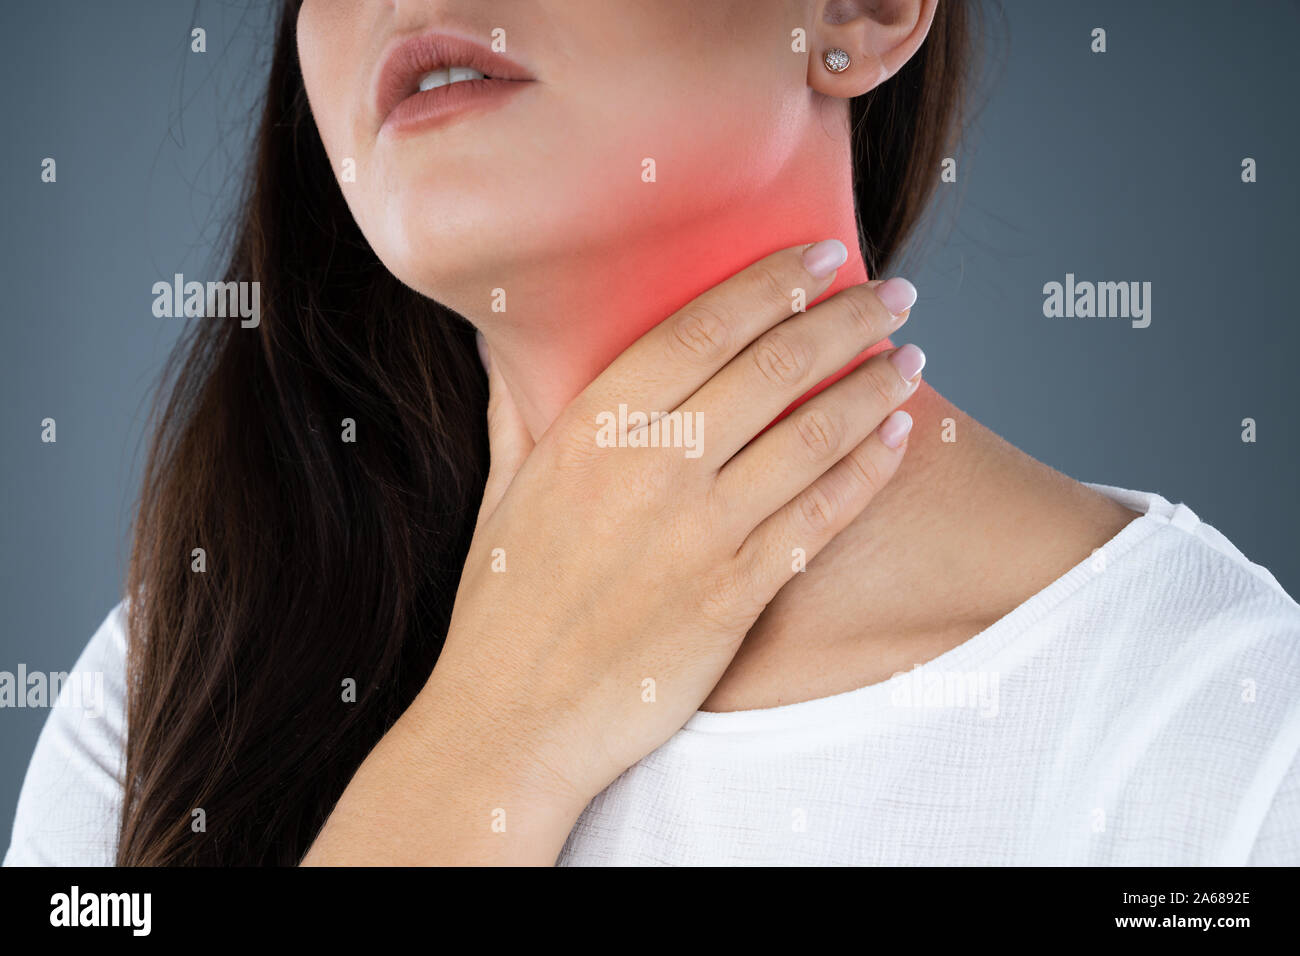 Close-up Of Female Suffering From Gland Inflammation Stock Photo